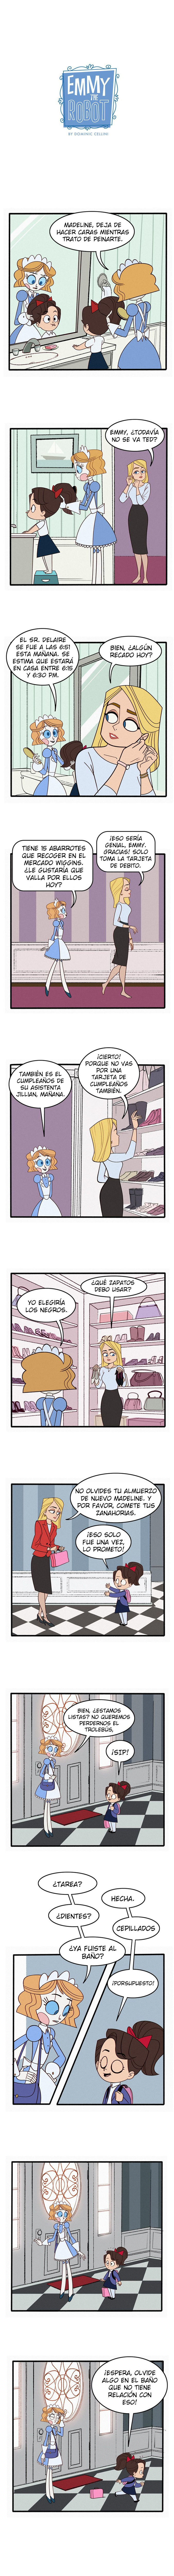 Emmy The Robot [Spanish] (Ongoing 21